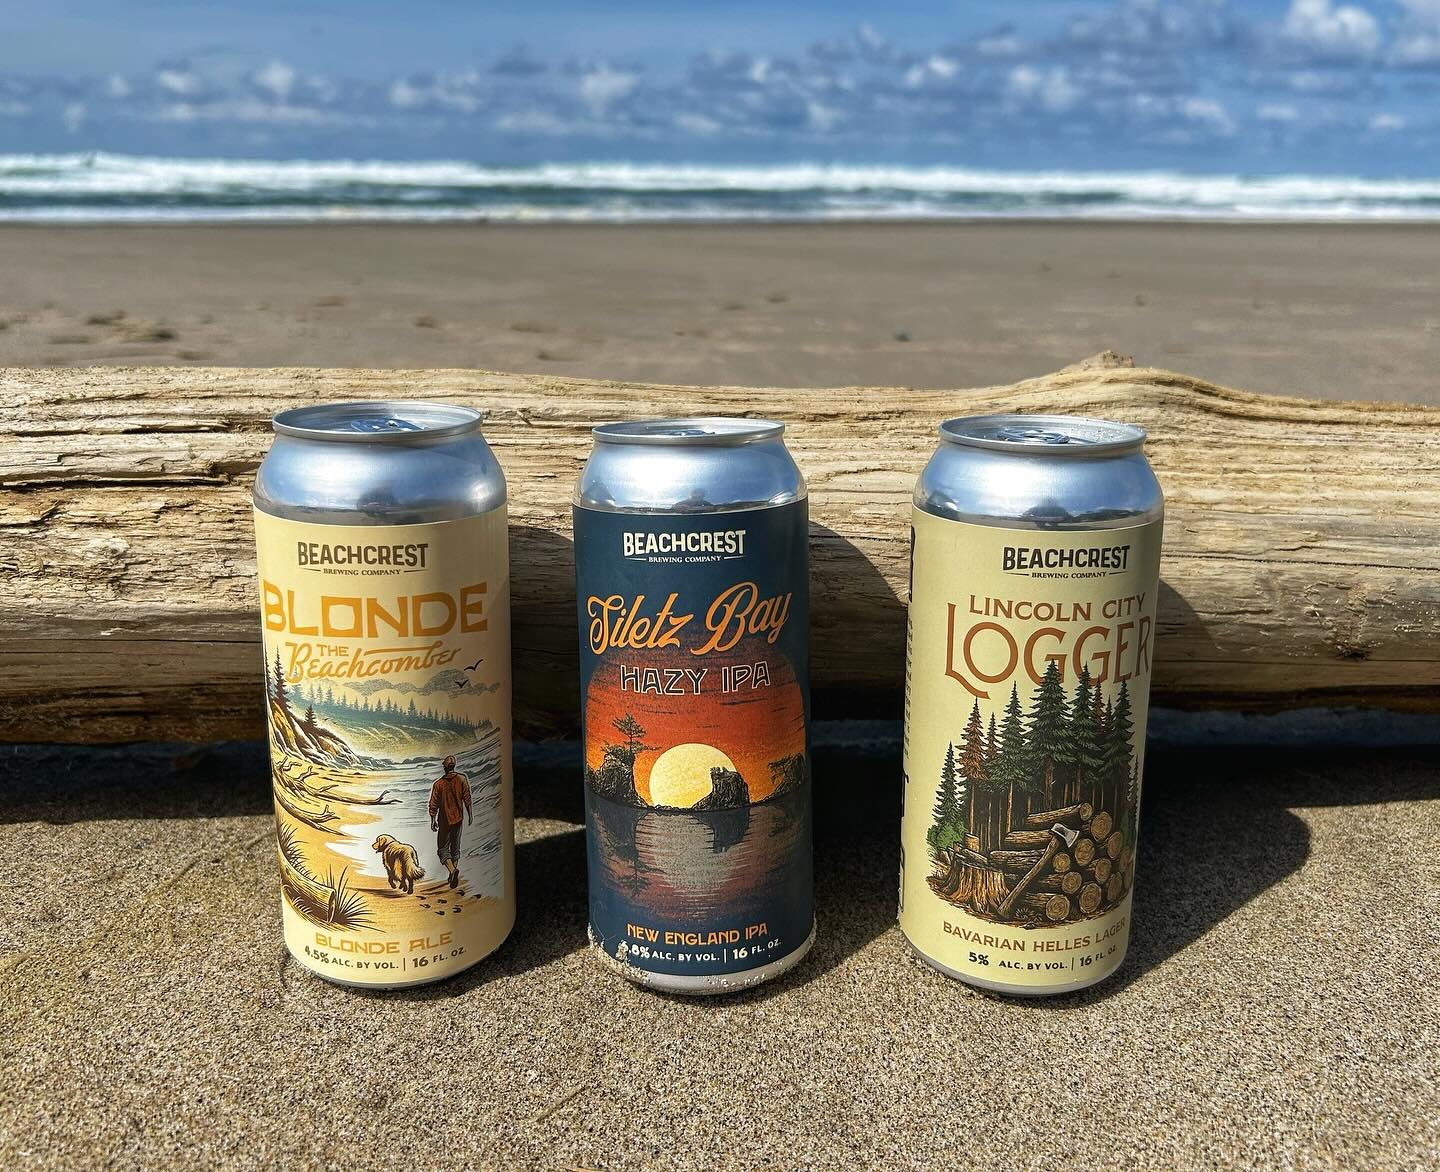 The weather has been gorgeous for the last few days on the coast and you can just feel the excitement in the air for the upcoming summer season.  Adventures, hikes, sunshine, BBQs, and bonfires on the beach are ready to be had.  Don't forget to pack 